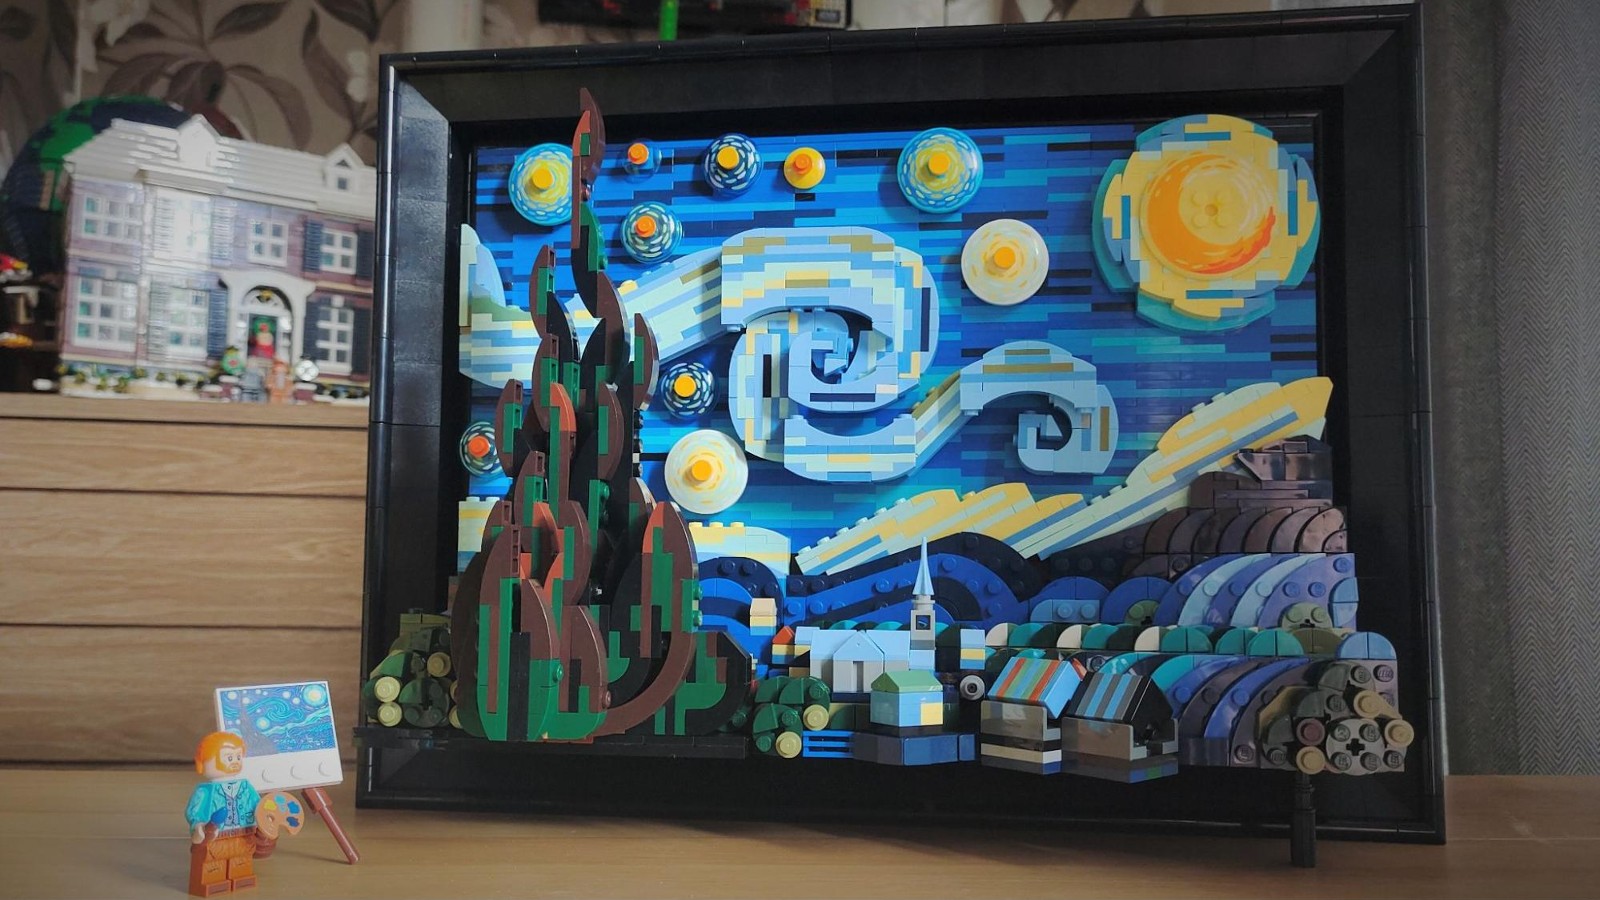 Van Gogh's 'The Starry Night' reimagined by LEGO in 2,316 bricks